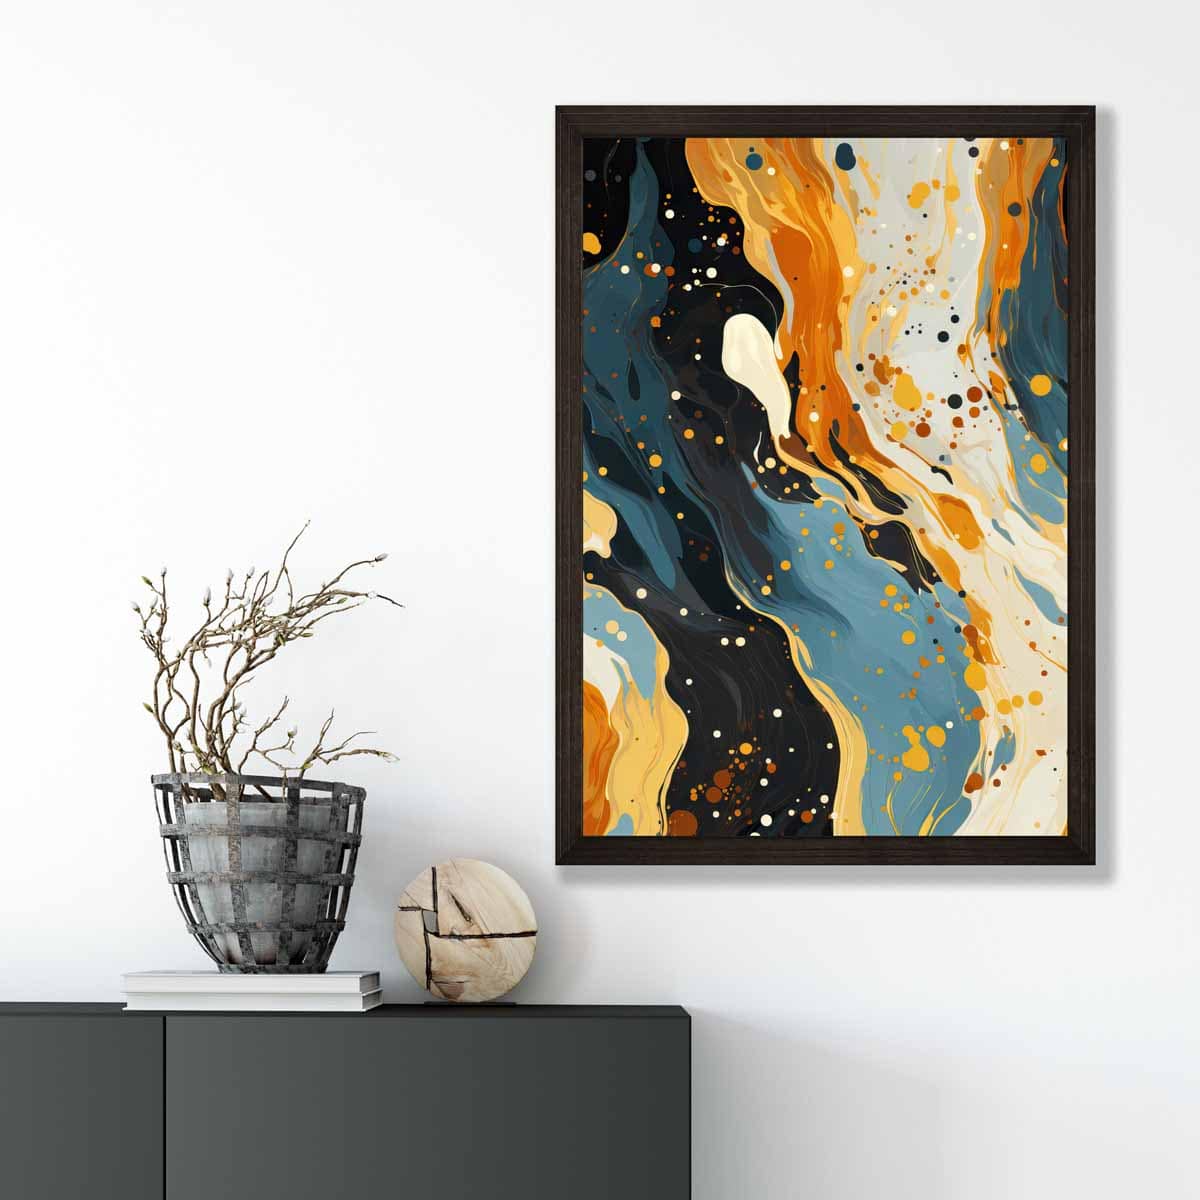 Abstract Painting Fluid Art Print Blue Orange and Beige No 1